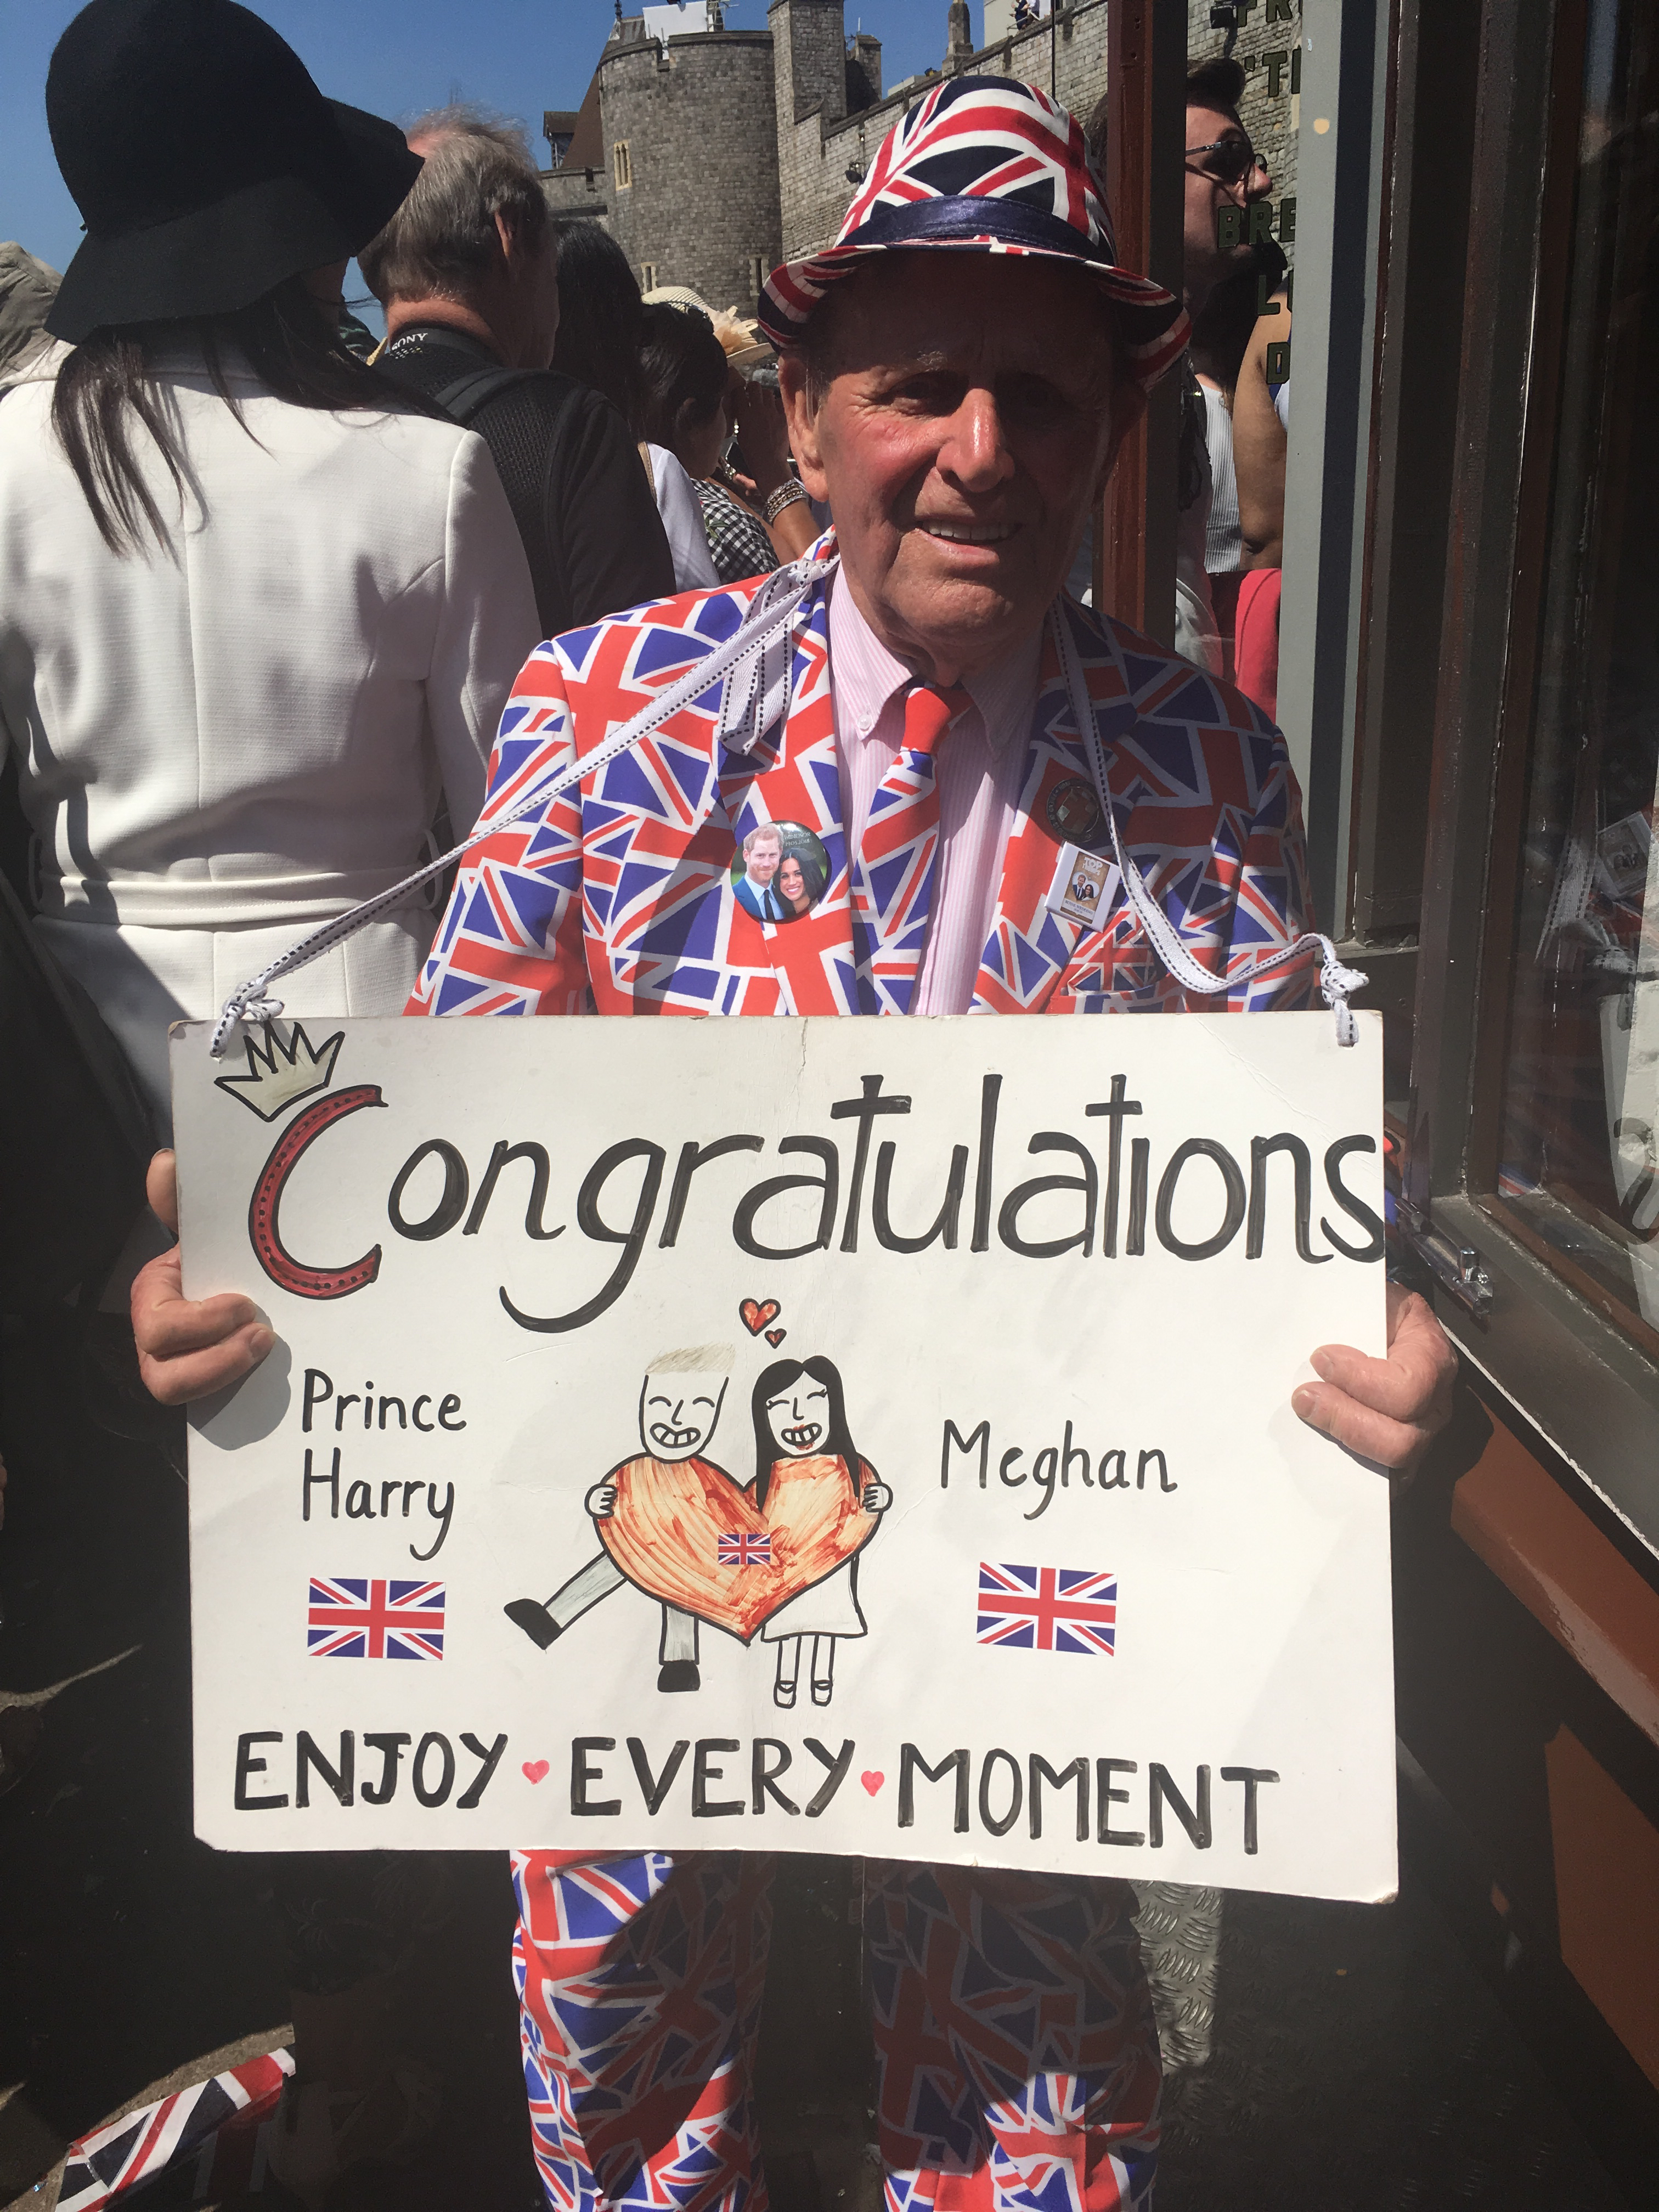 Long-term royal fan Terry Hutt, 83, in Windsor following the wedding of Prince Harry and Meghan Markle, on May 19 2018. (Kate Samuelson—TIME)